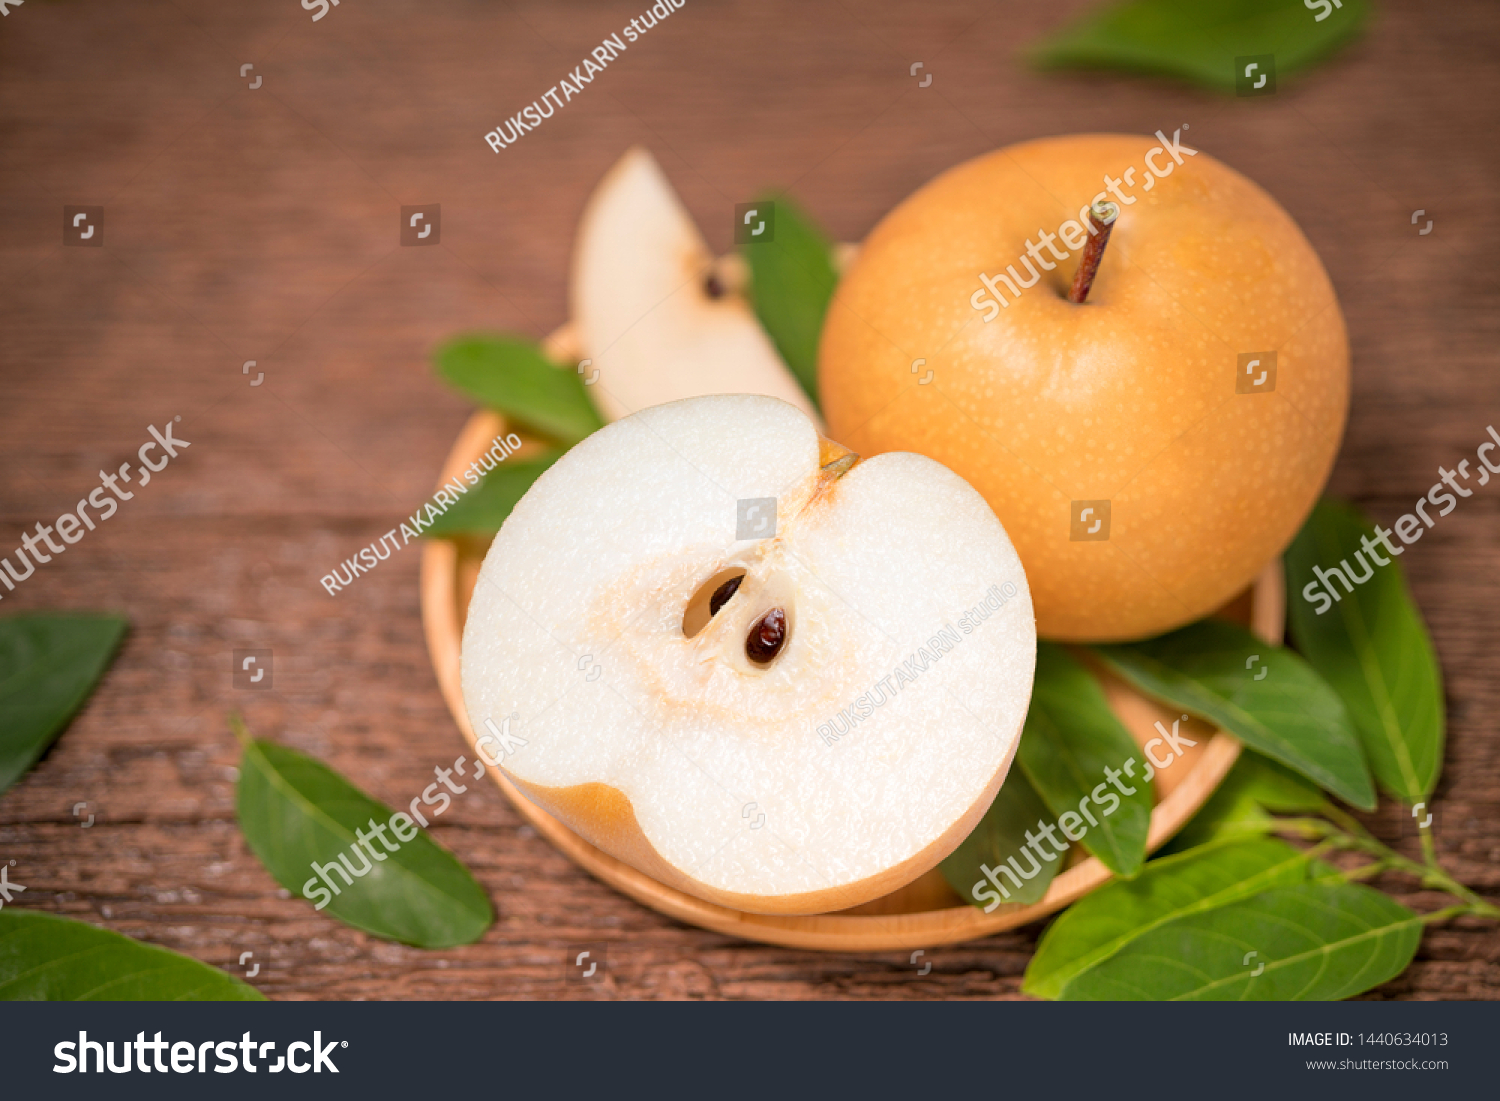 Snow pear or Korean pear on a wooden background, Nashi pear fruits delicious and sweet #1440634013